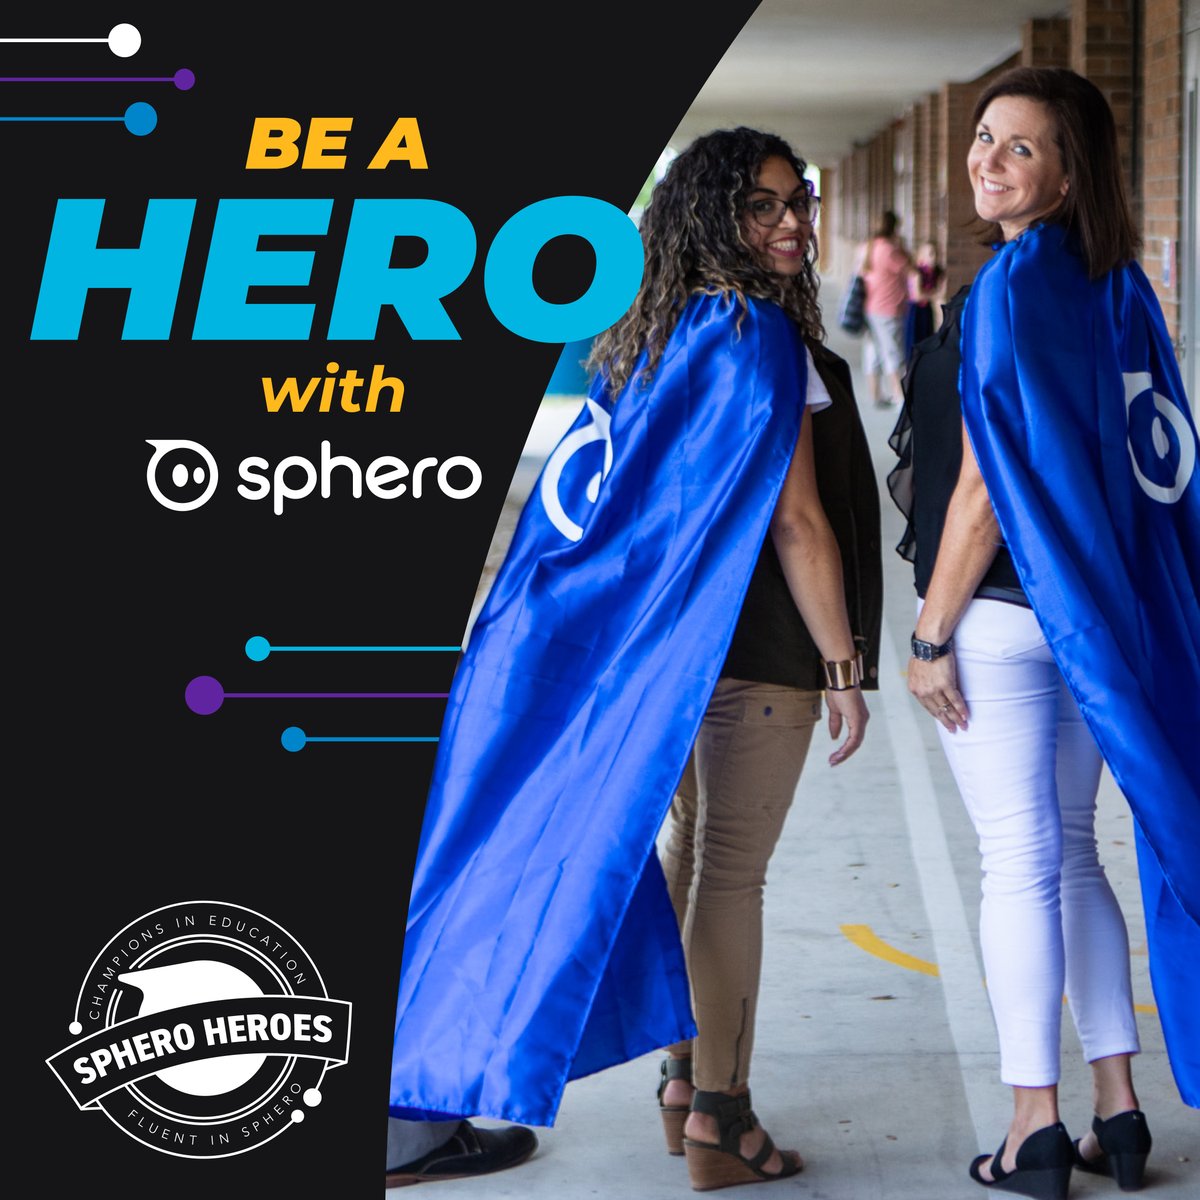 Mark your calendar and don't miss your chance to be a part of an exciting community of Sphero educators! 🦸 Sphero Hero applications open May 15th. Find the full application guide with all the tips, tricks, and instructions for applying: bit.ly/49Yyjyr